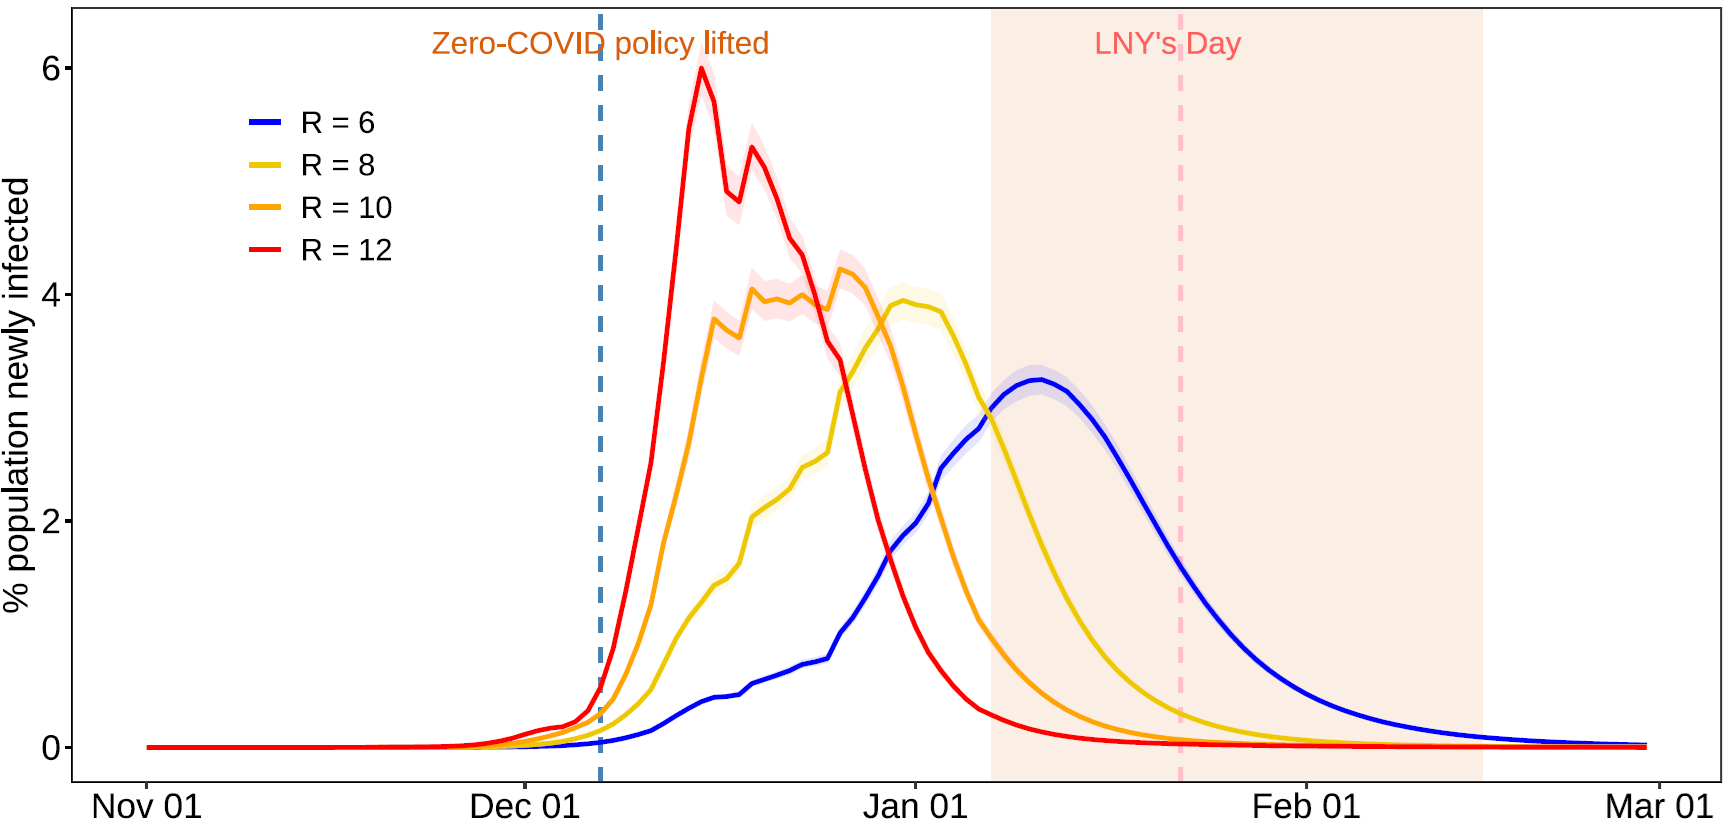 Graph showing estimated daily COVID infections in China from November 2022 to February 2023, under different reproduction numbers